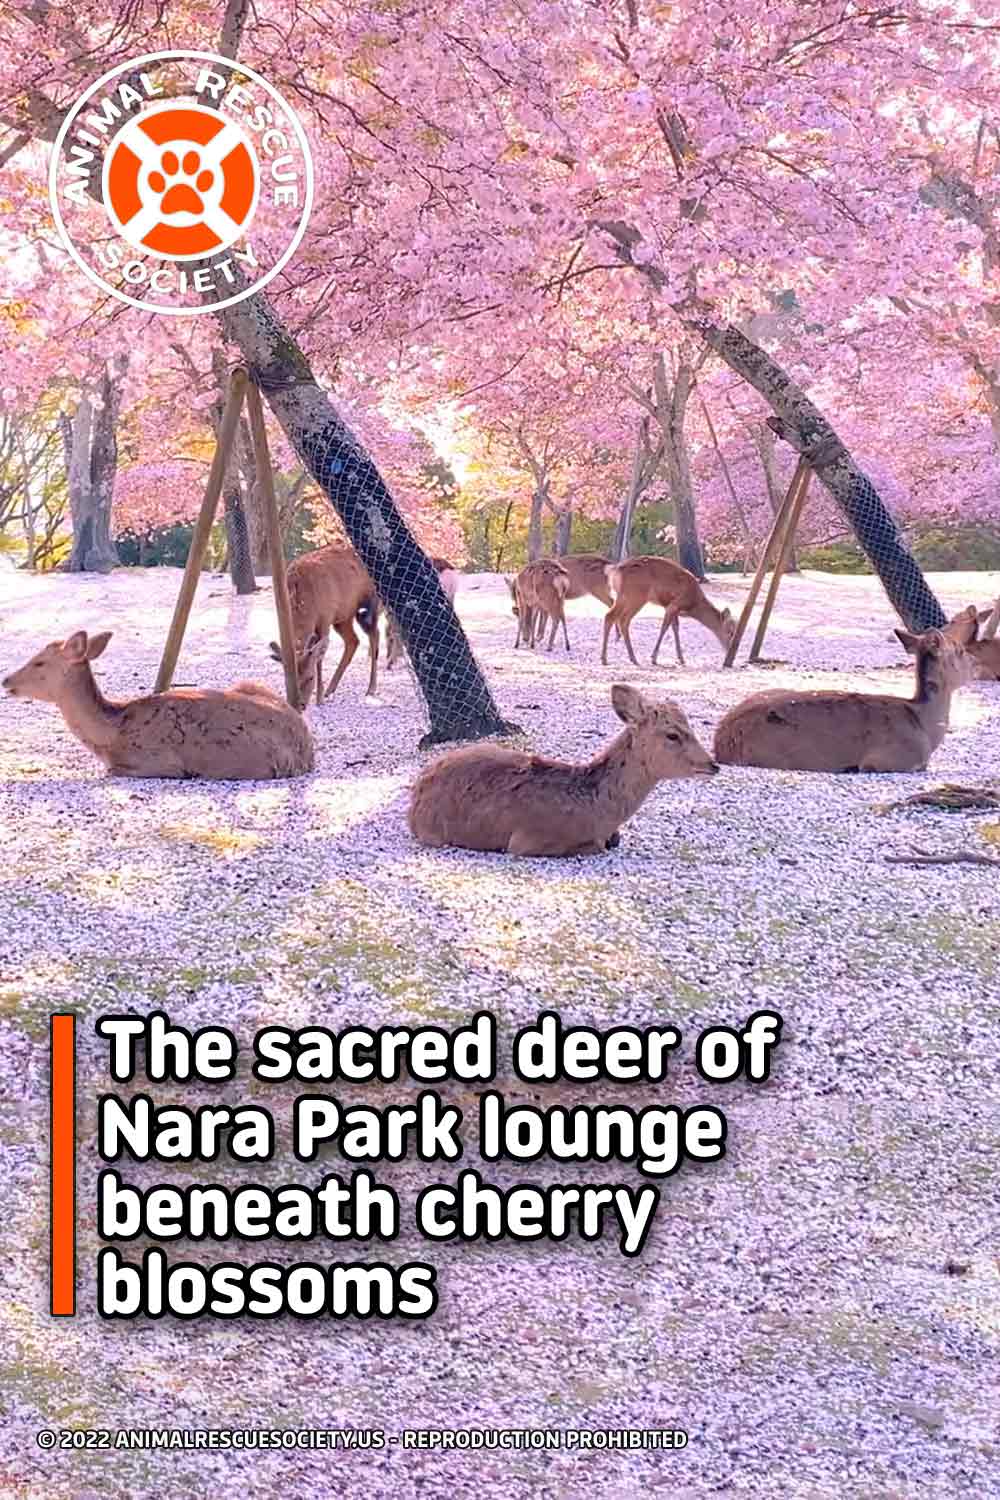 The sacred deer of Nara Park lounge beneath cherry blossoms